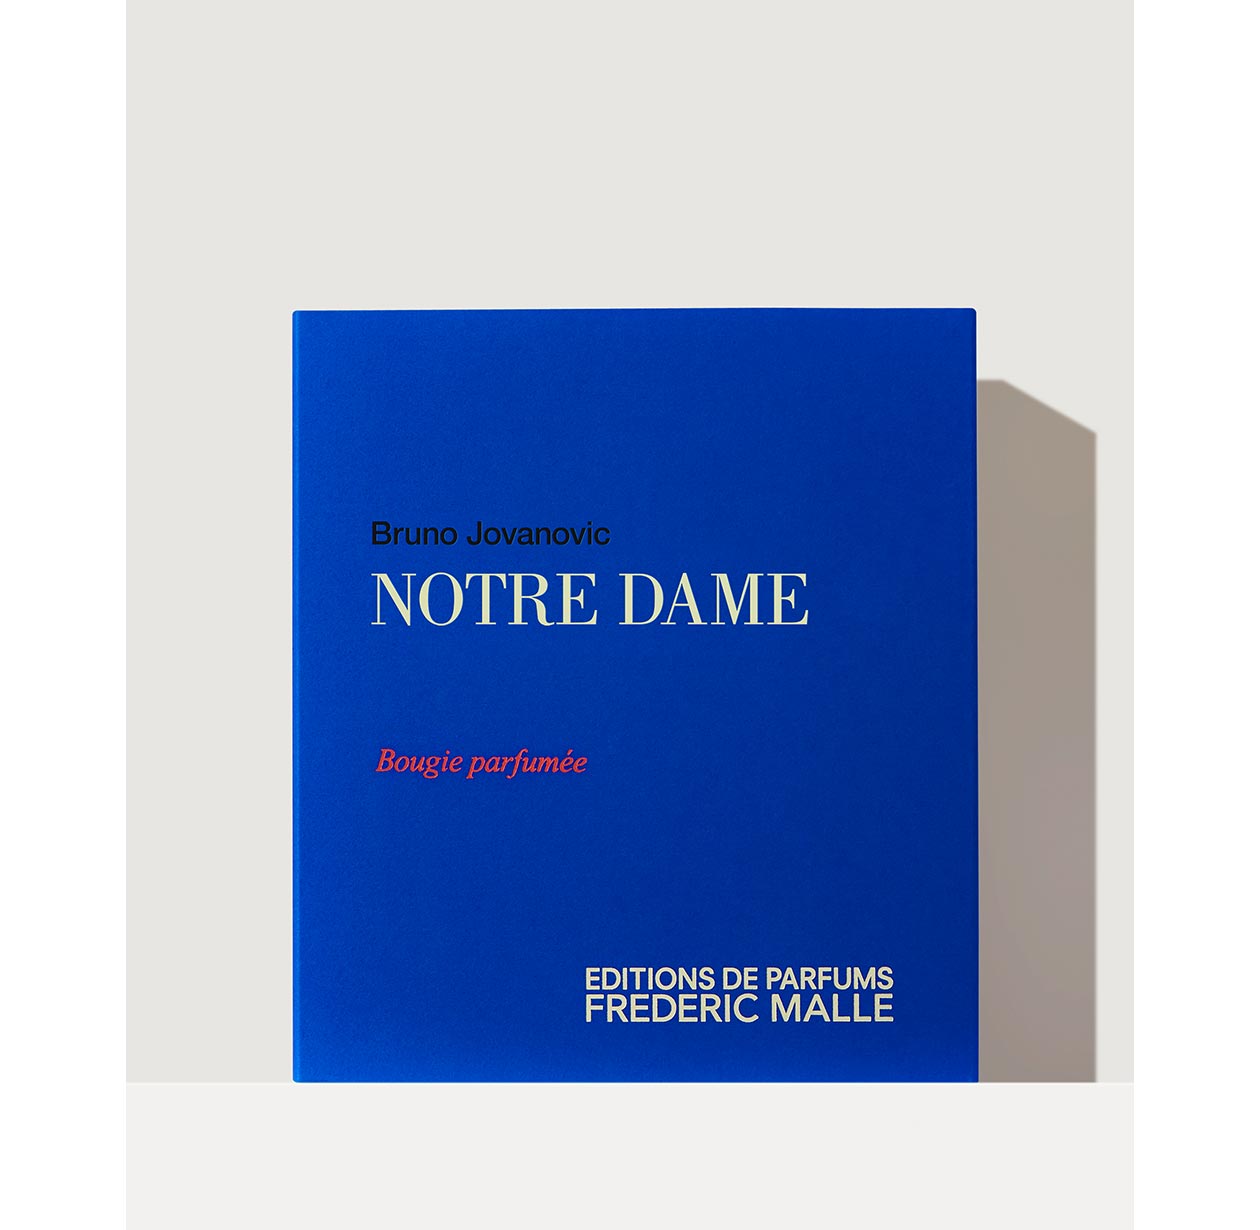 NOTRE DAME by Bruno Jovanovic - Candle